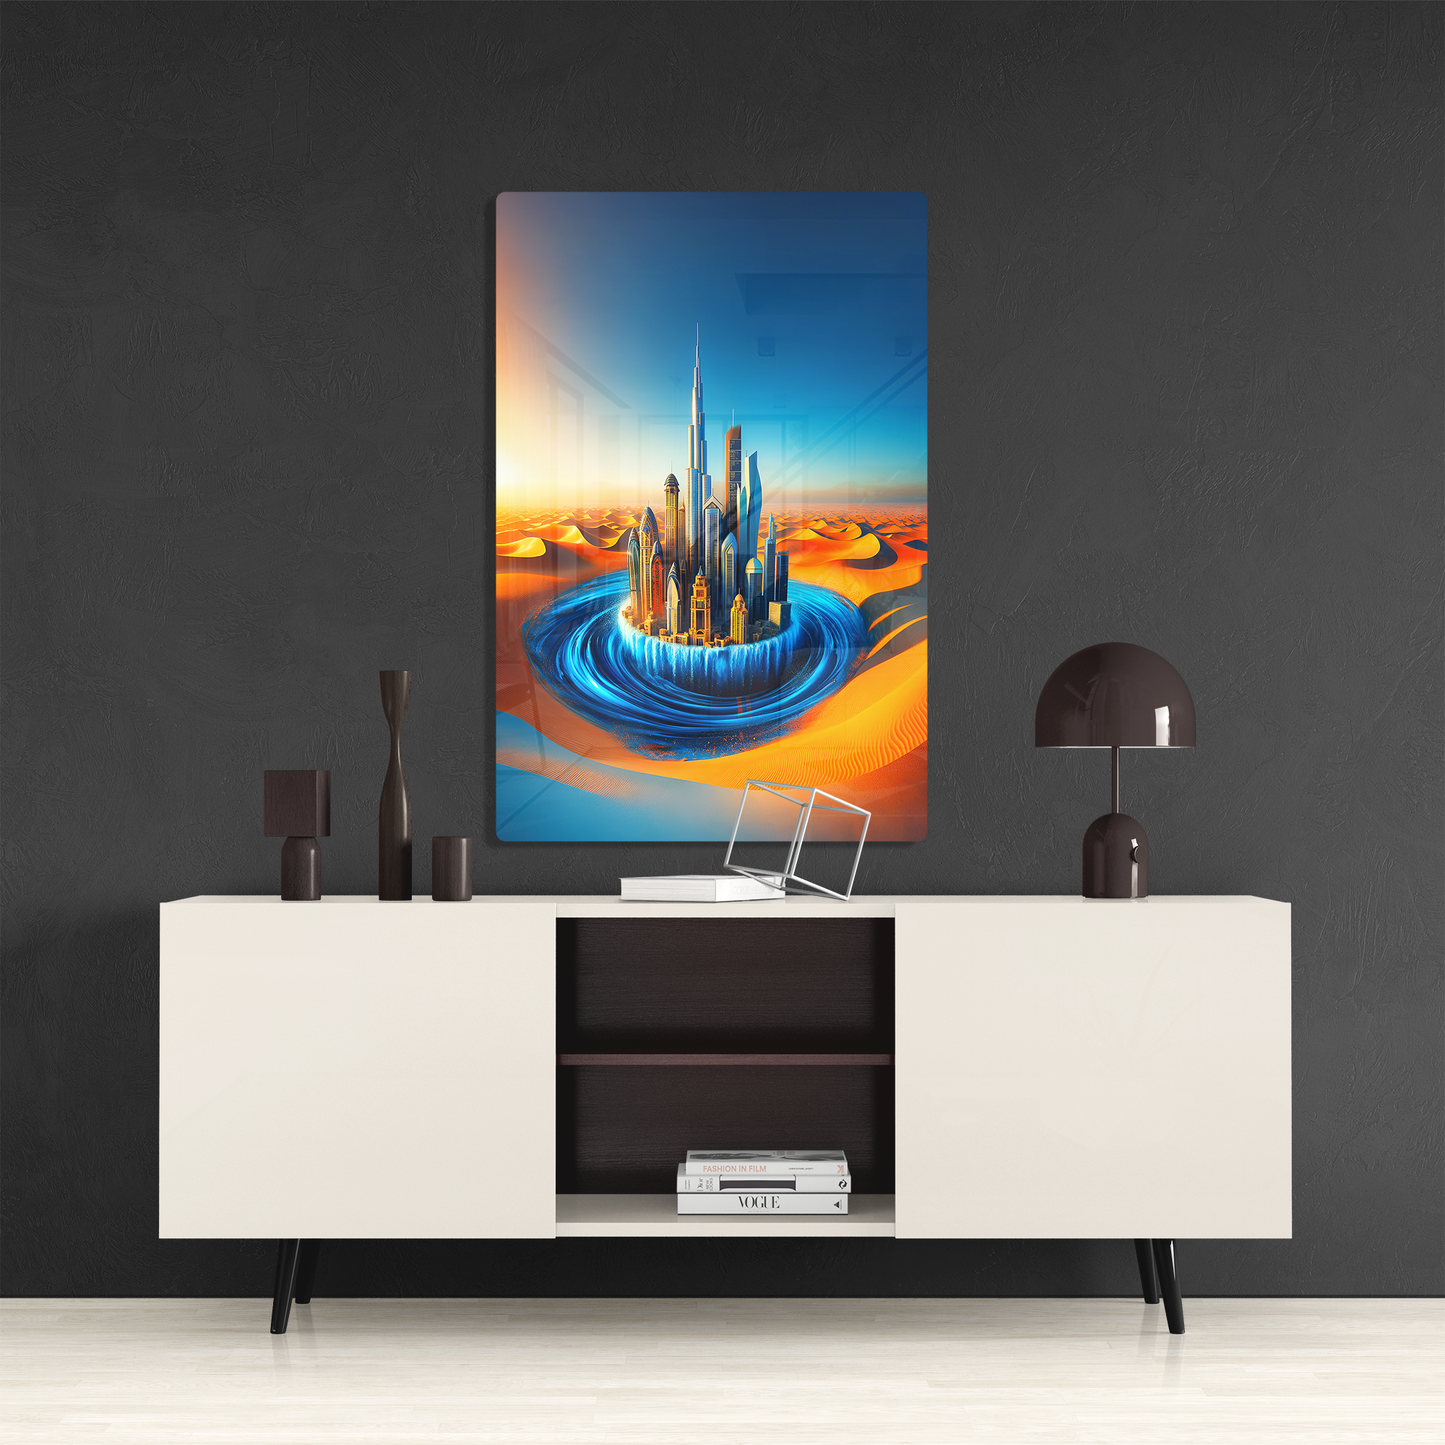 Aqua Metropolis (Acrylic)Aqua Metropolis
Elevate your home with our rimagallery Acrylic Prints. Offering a stunning glass-like appearance and superior quality, these prints transform any rooRimaGallery